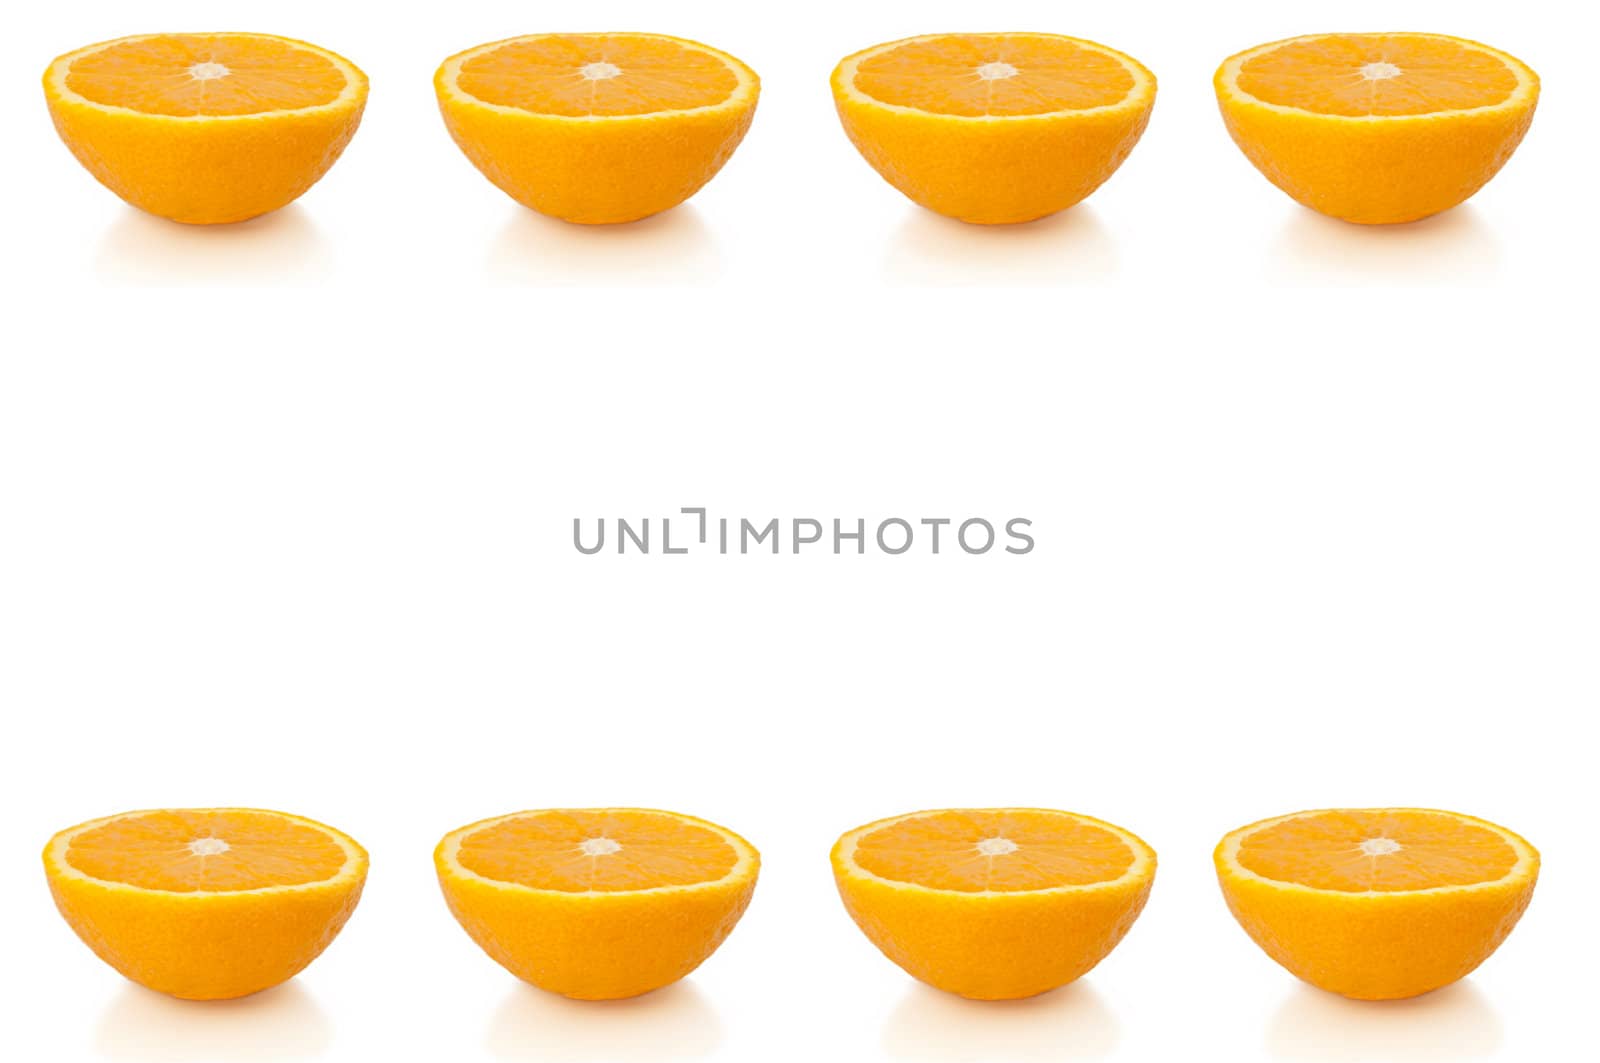 Eight small orange halves arranged in horizontal lines along the bottom and top of the image and over white.